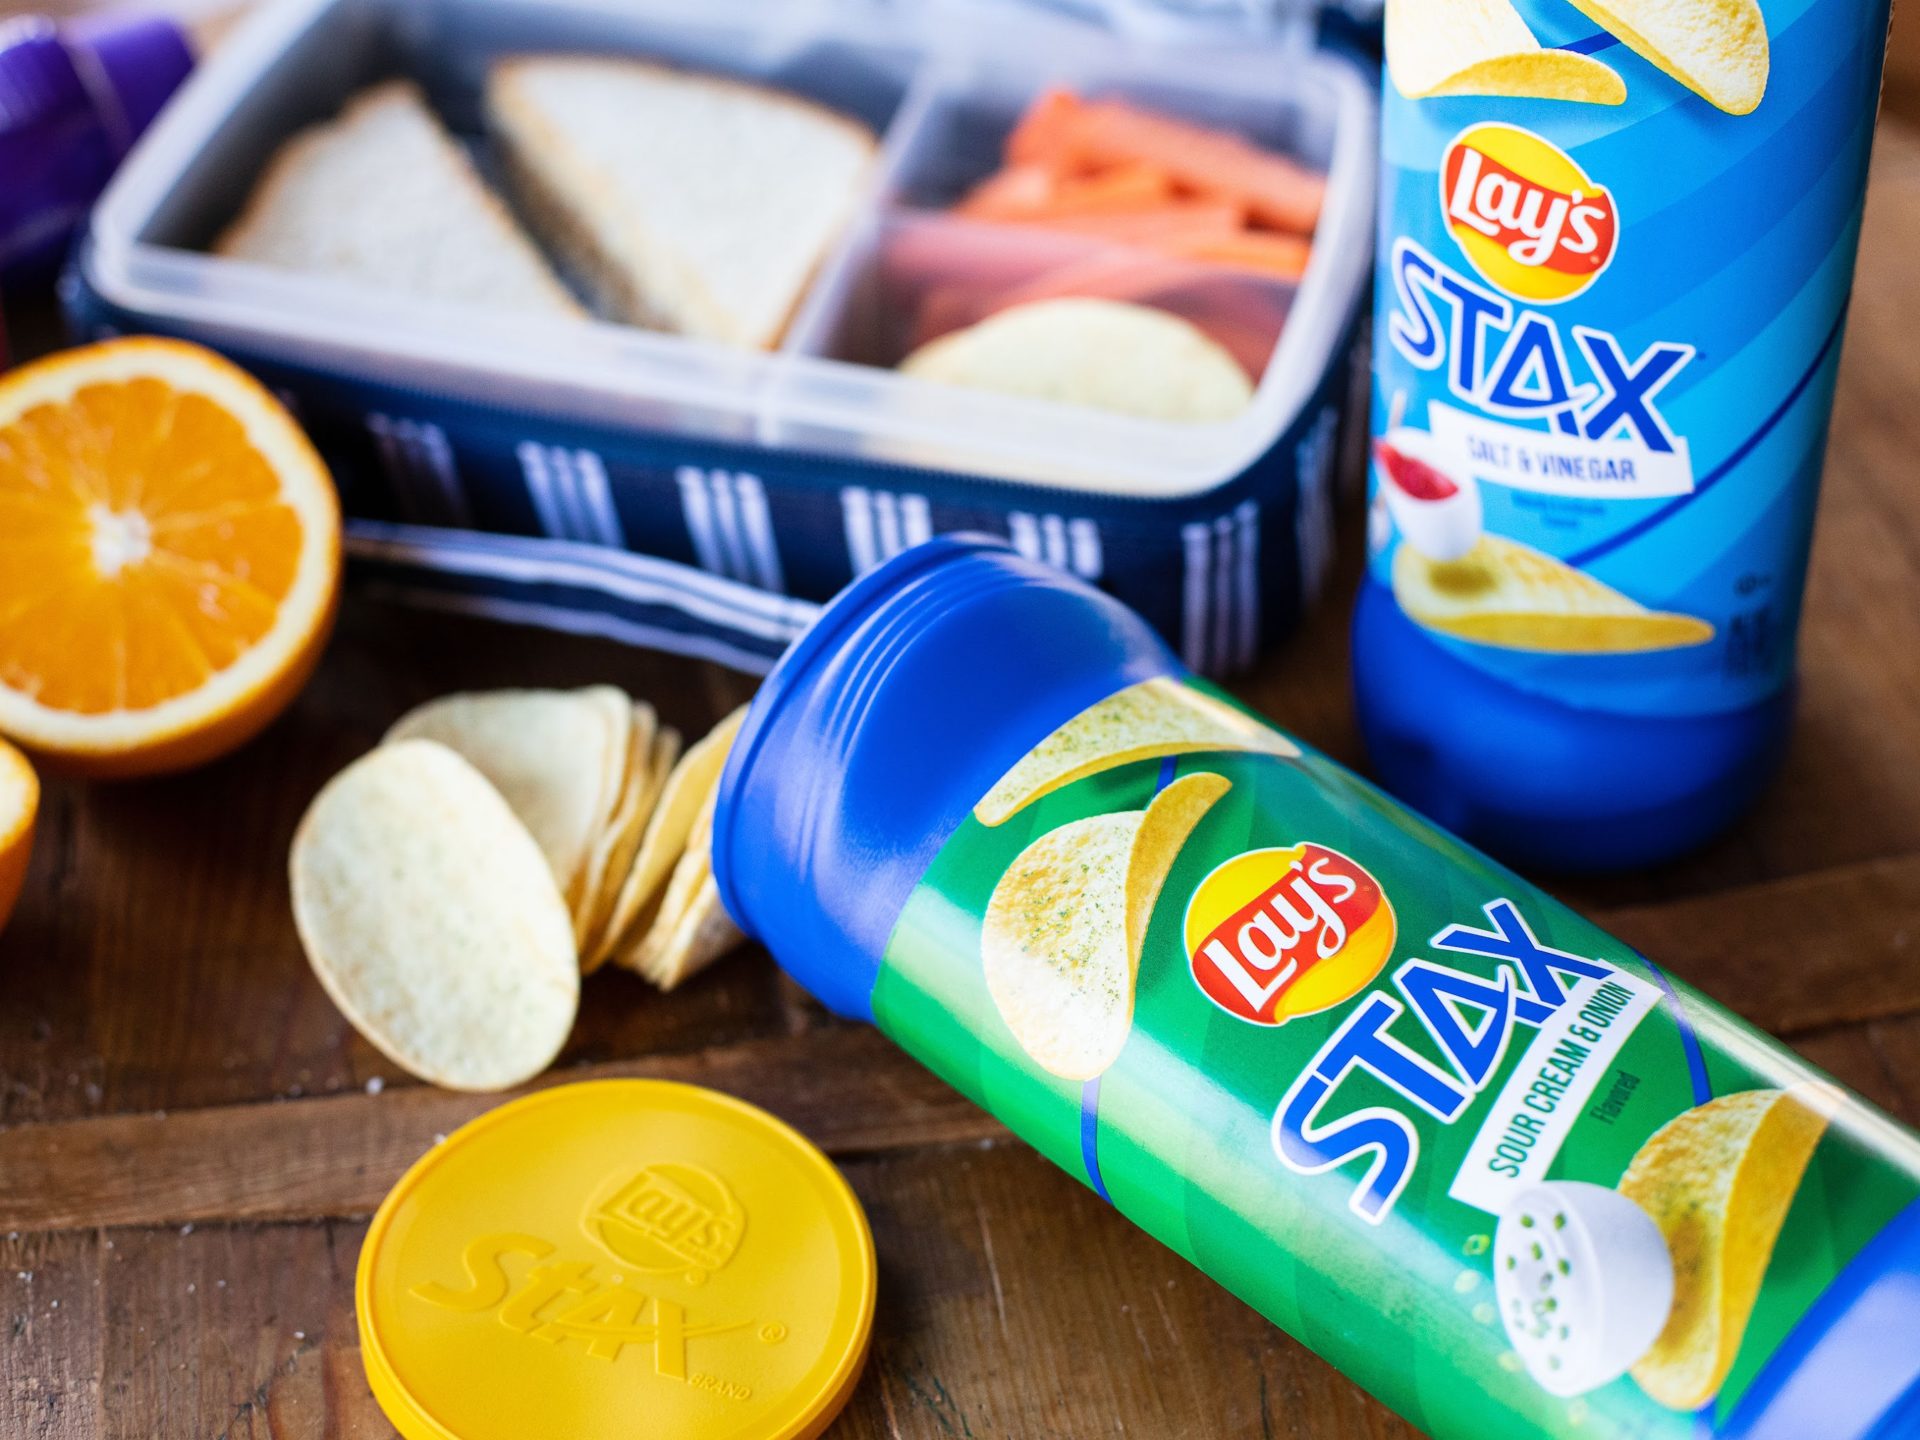 Lay’s Stax As Low As 99¢ At Kroger